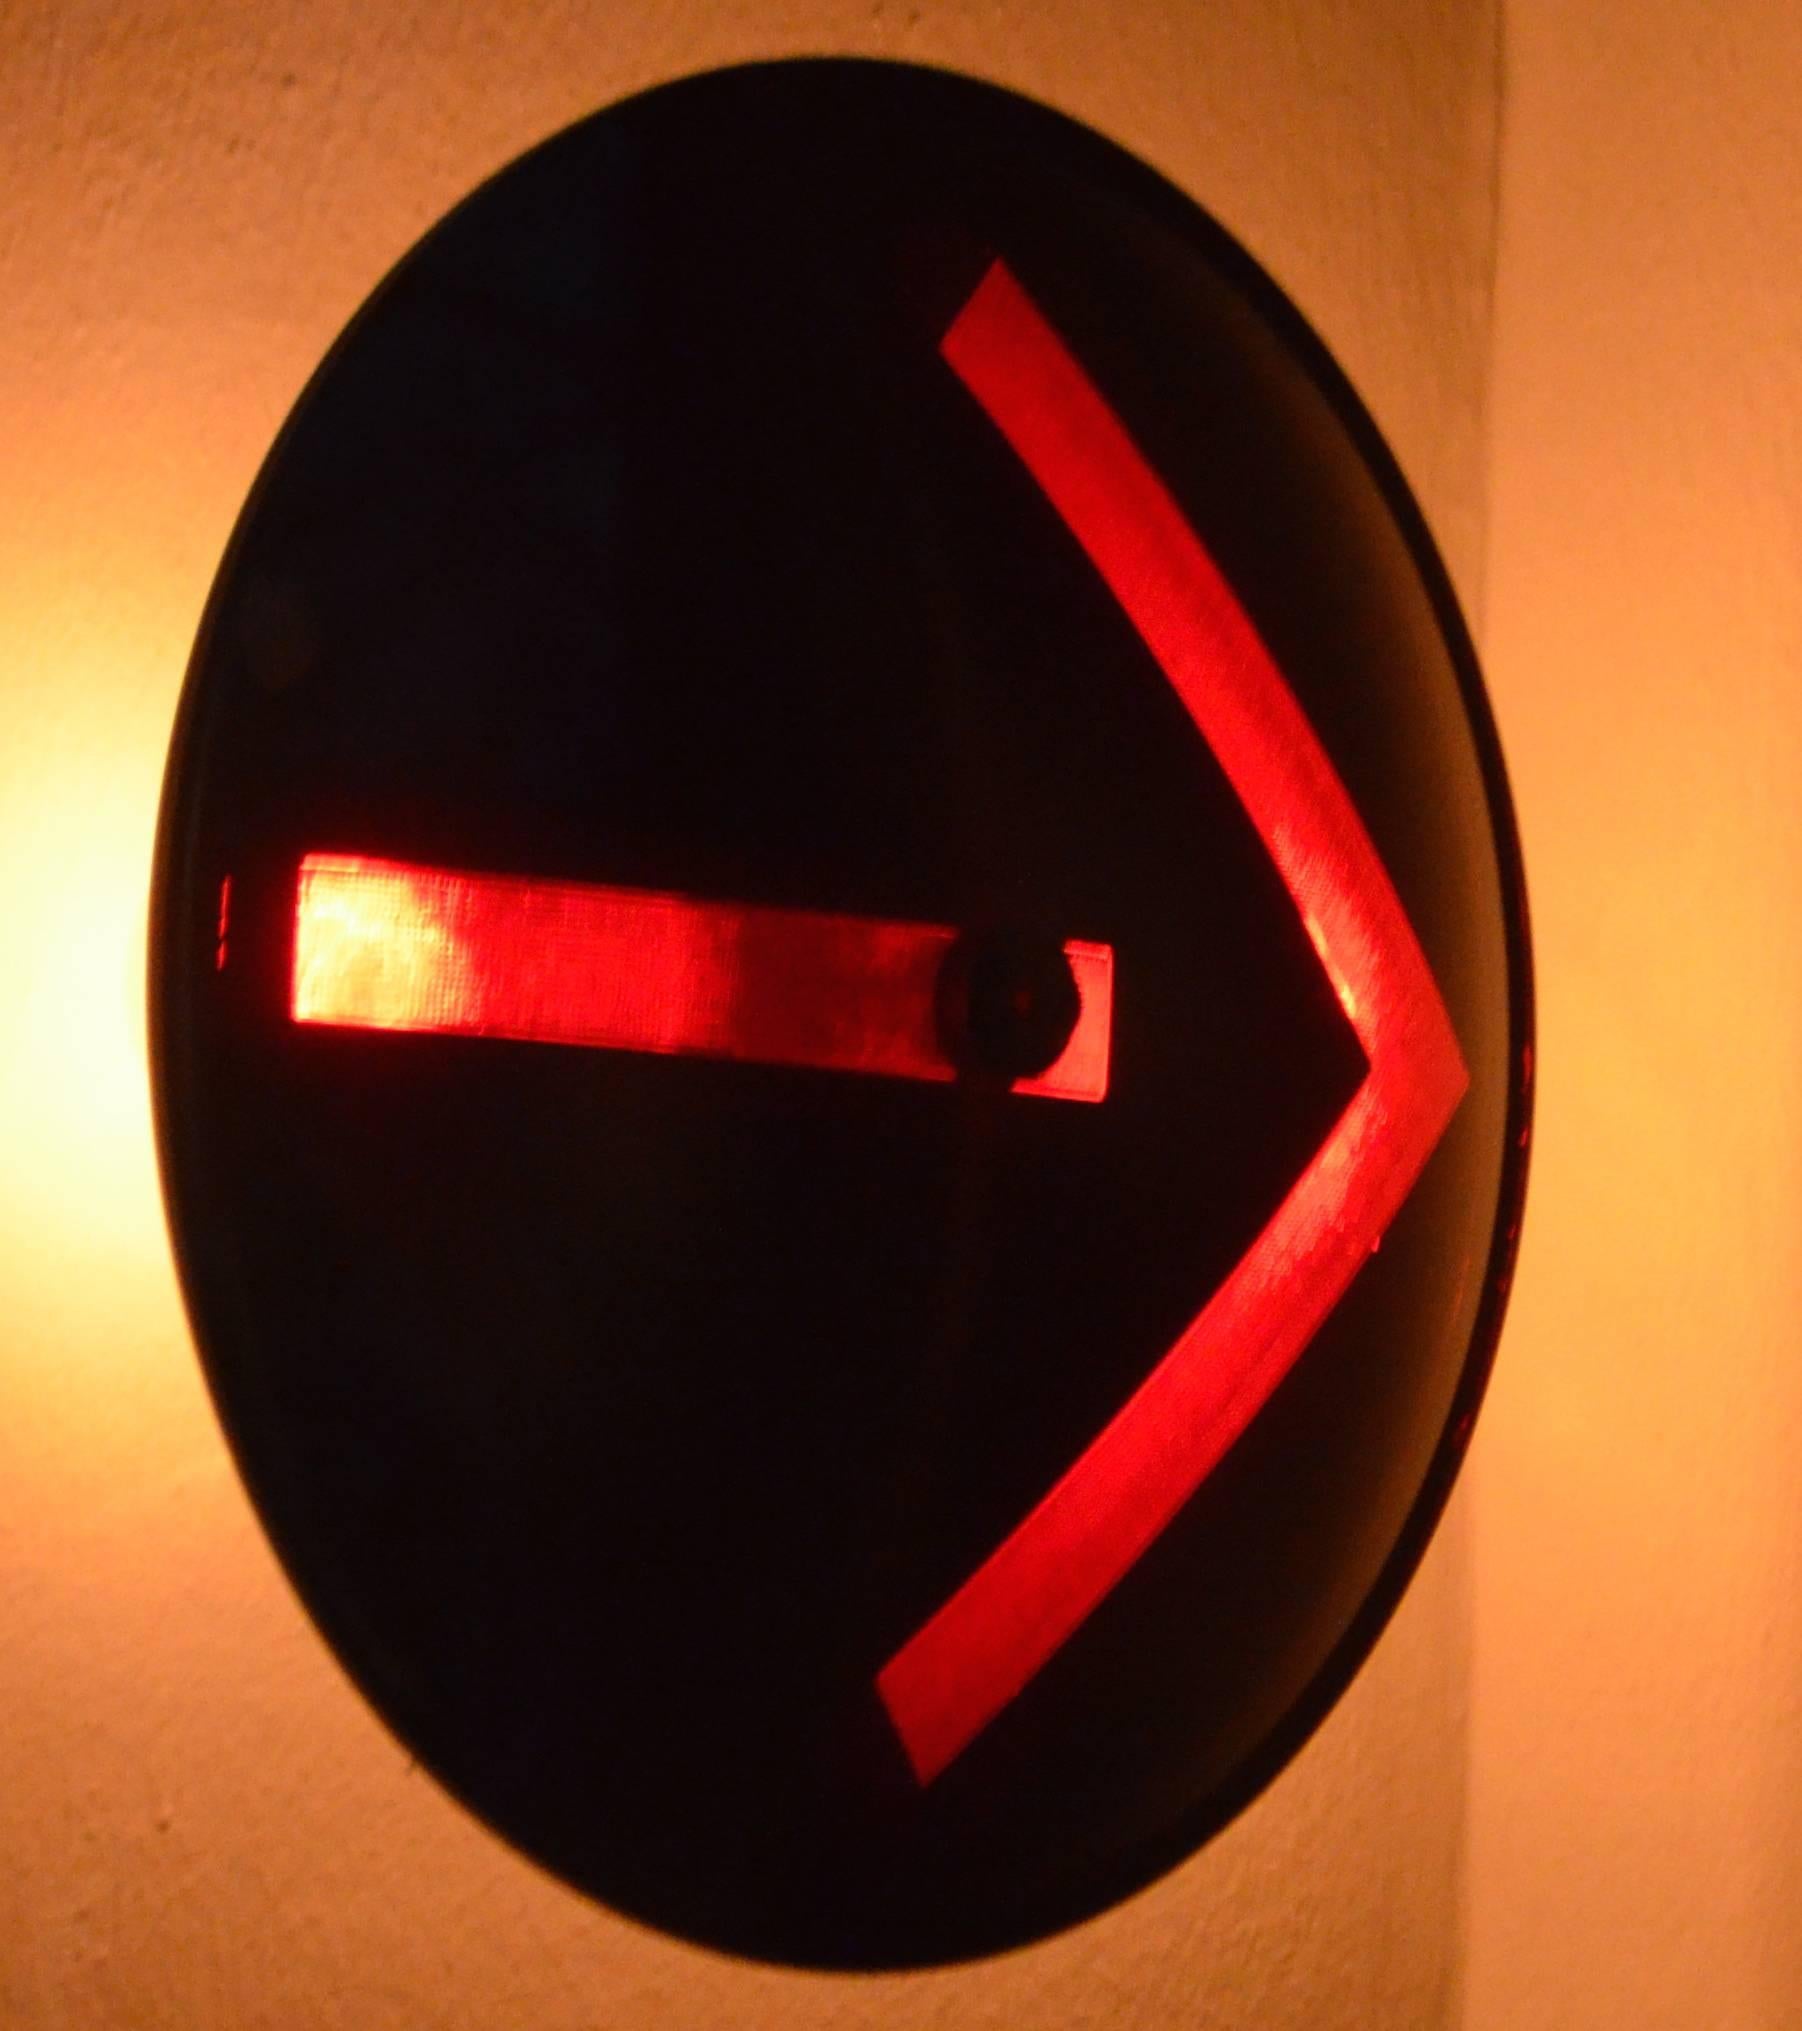 Traffic signal light, turn-arrow Directional's of glass made into a wall sconce. Never-used lens from Kopp manufacturing available in caution yellow, no-turn red, go-ahead-and-turn green, which is actually blue glass that projects green when lit.